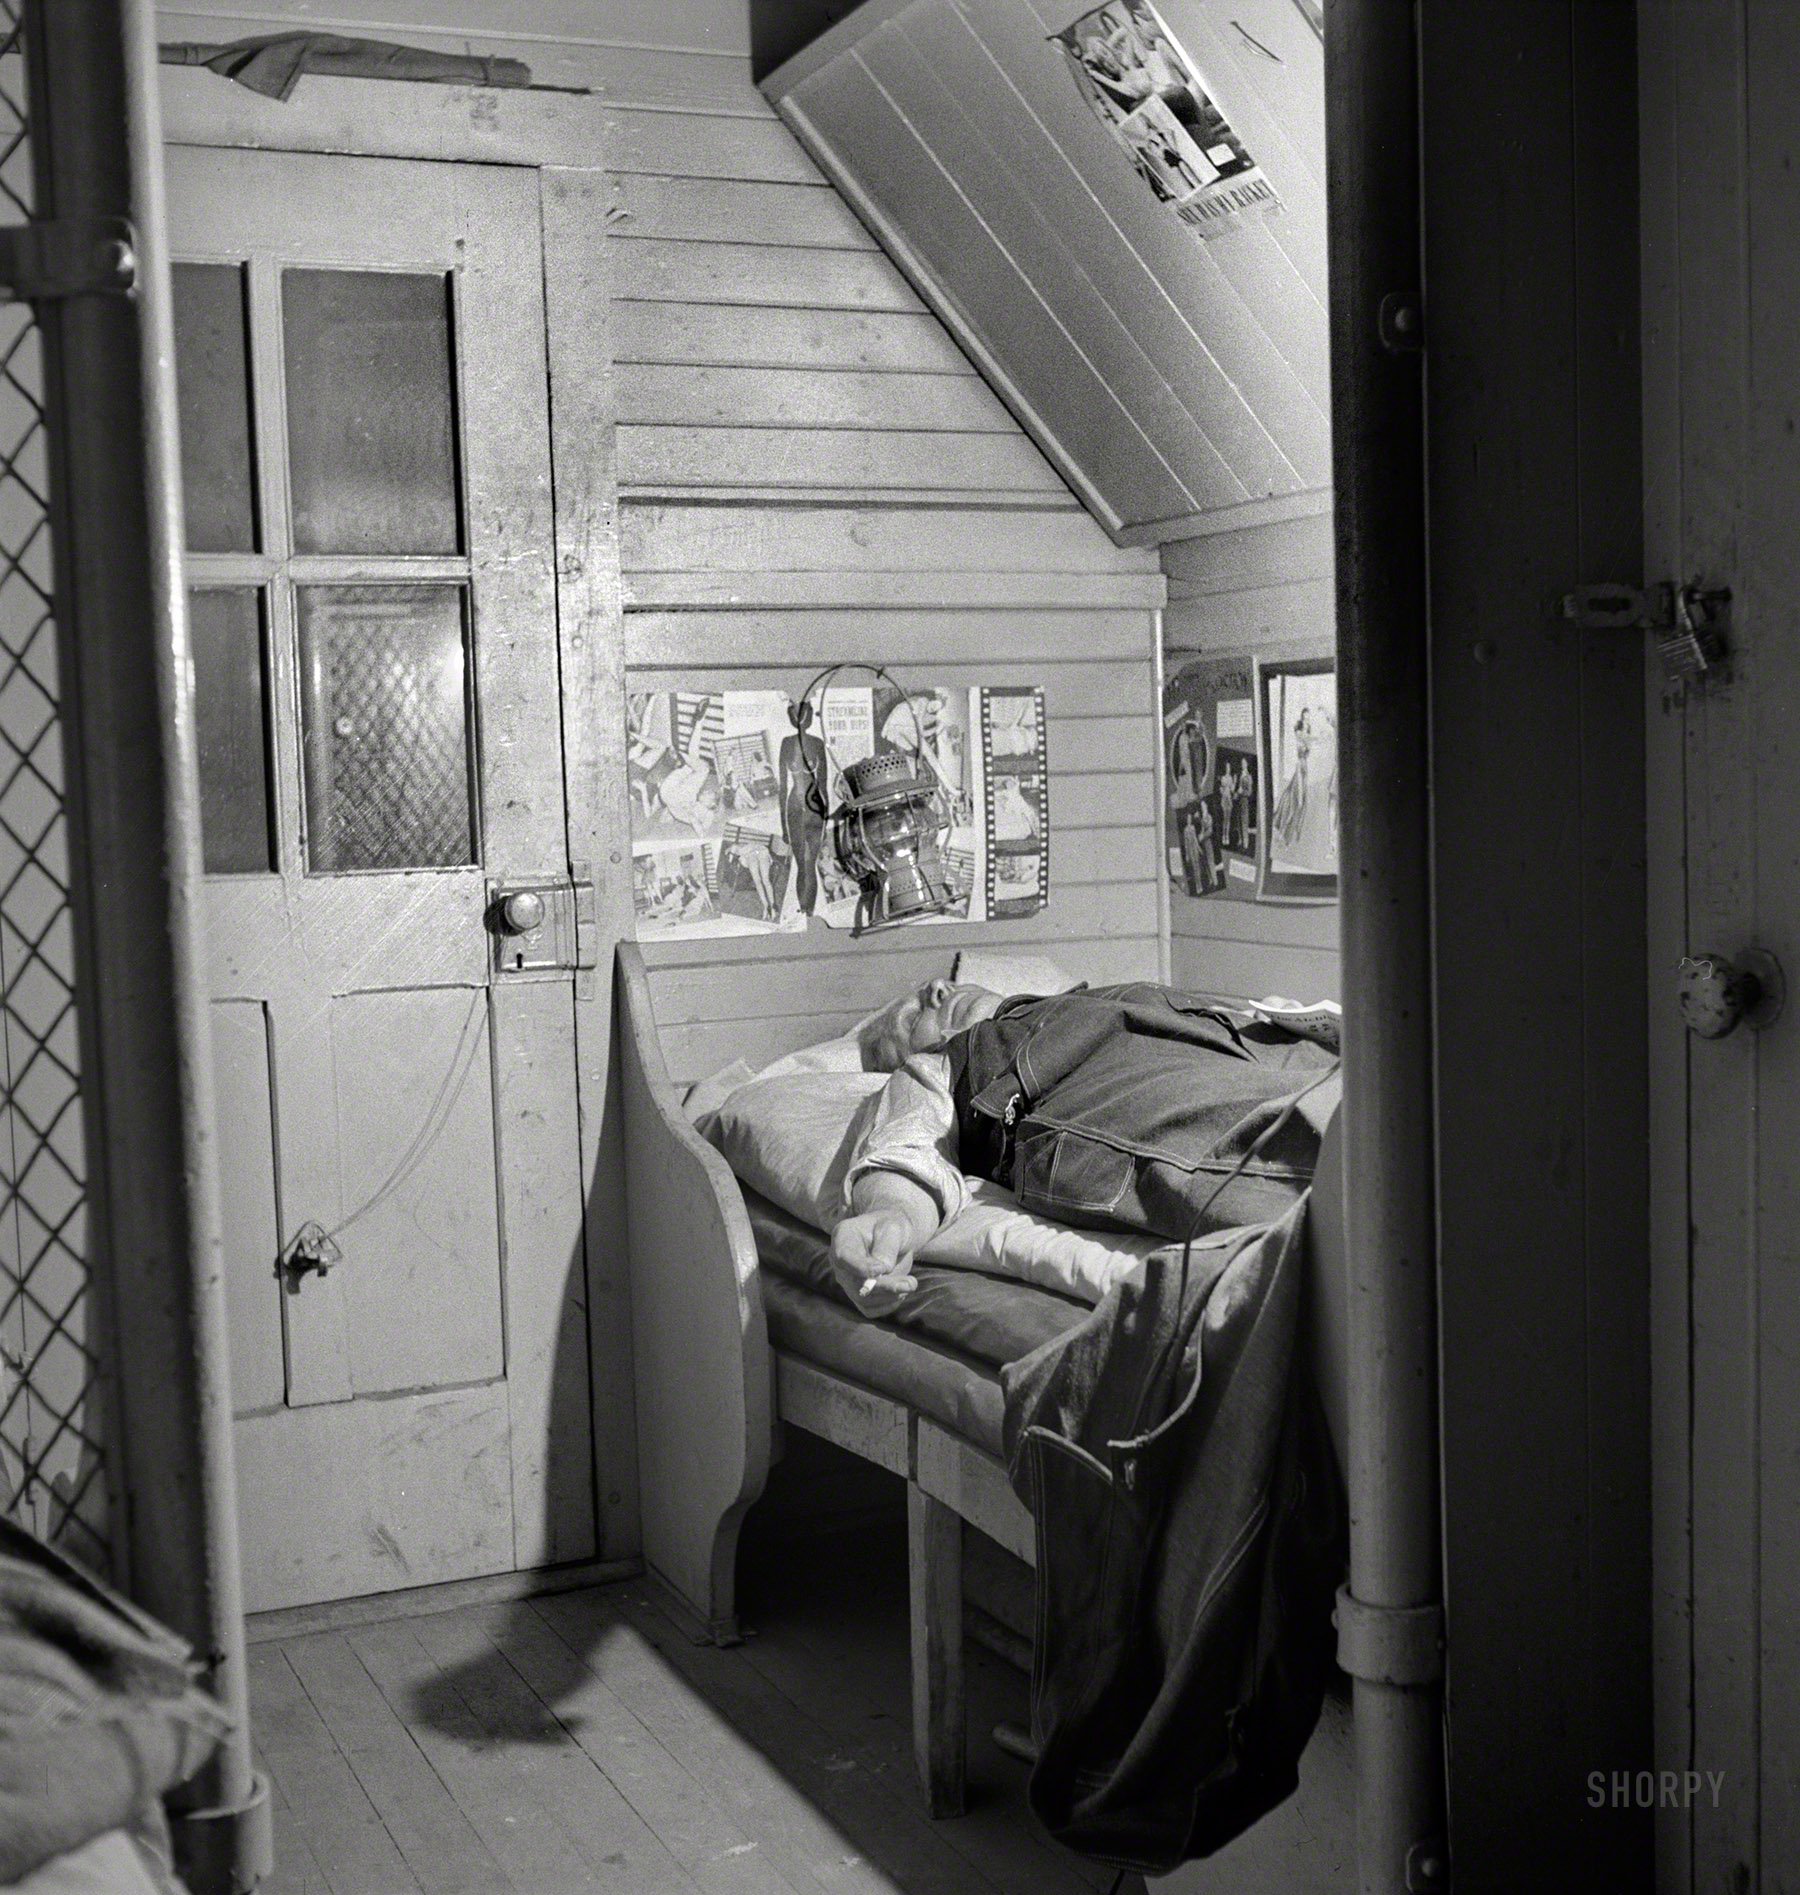 March 1943. "Barstow, California. A brakeman on the Atchison, Topeka and Santa Fe Railroad resting in his caboose at night." Pinup reading material includes: STREAMLINE YOUR HIPS! and SEX WAS MY RACKET. Medium-format safety negative by Jack Delano for the Office of War Information. View full size.